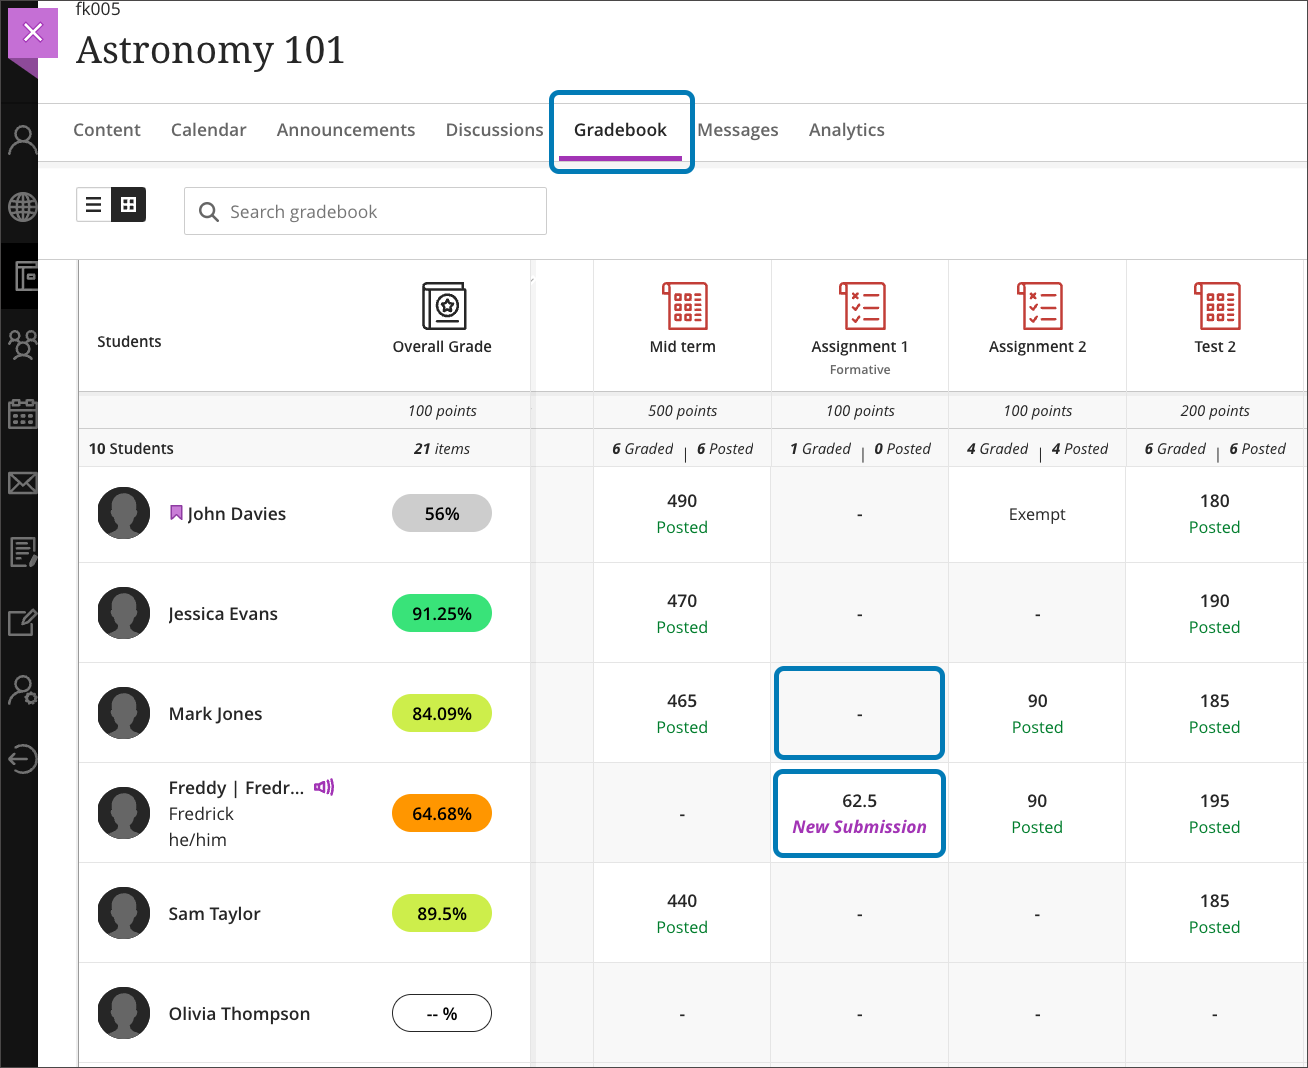 Instructor view of the gradebook grid view where cells without submissions are displaying “-” (a single dash); cells where there are new submissions still display the New Submission label